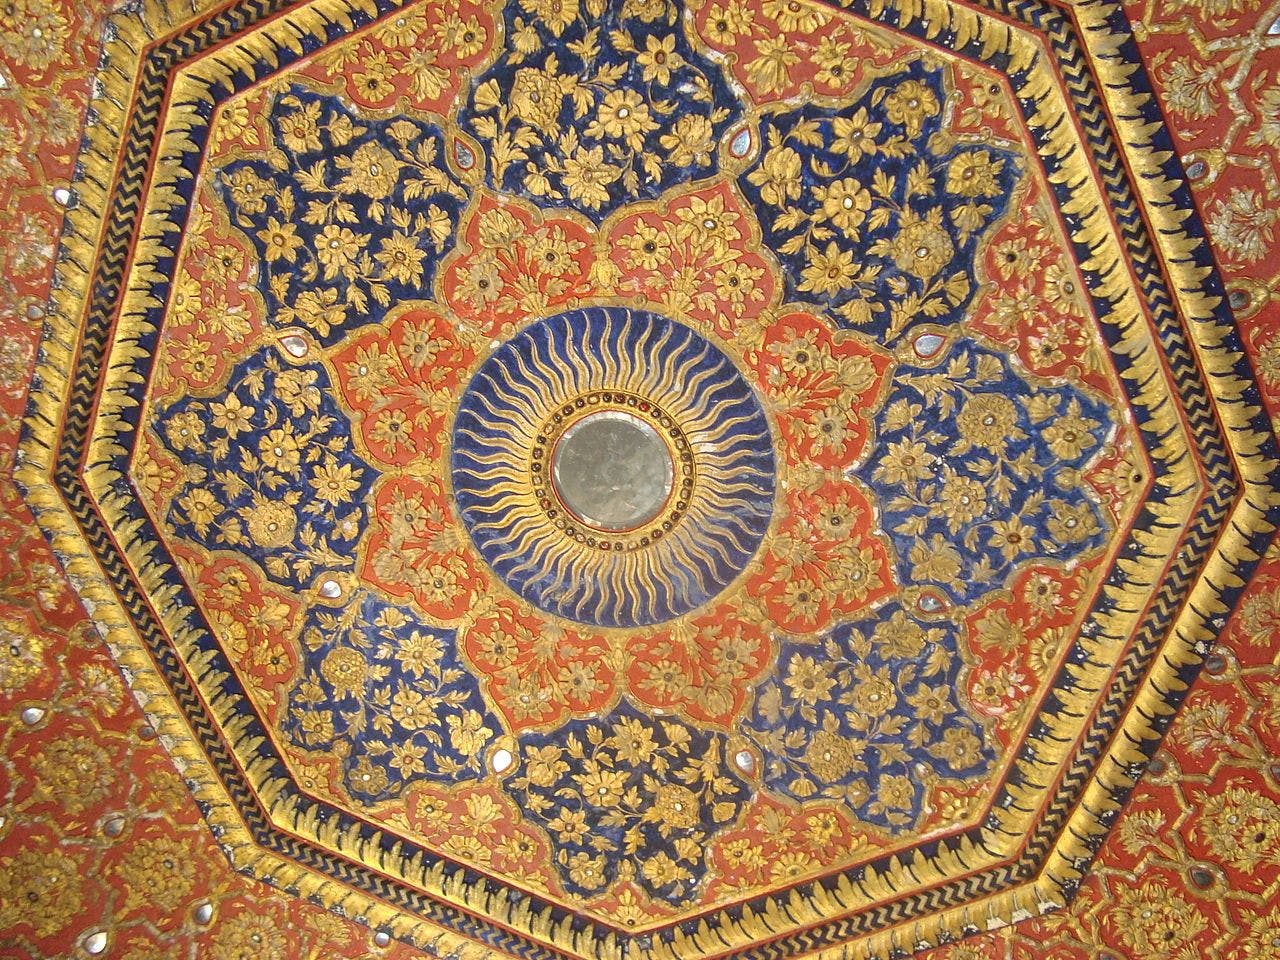 Ornate Ceiling of the Golden Temple in gold and precious stones